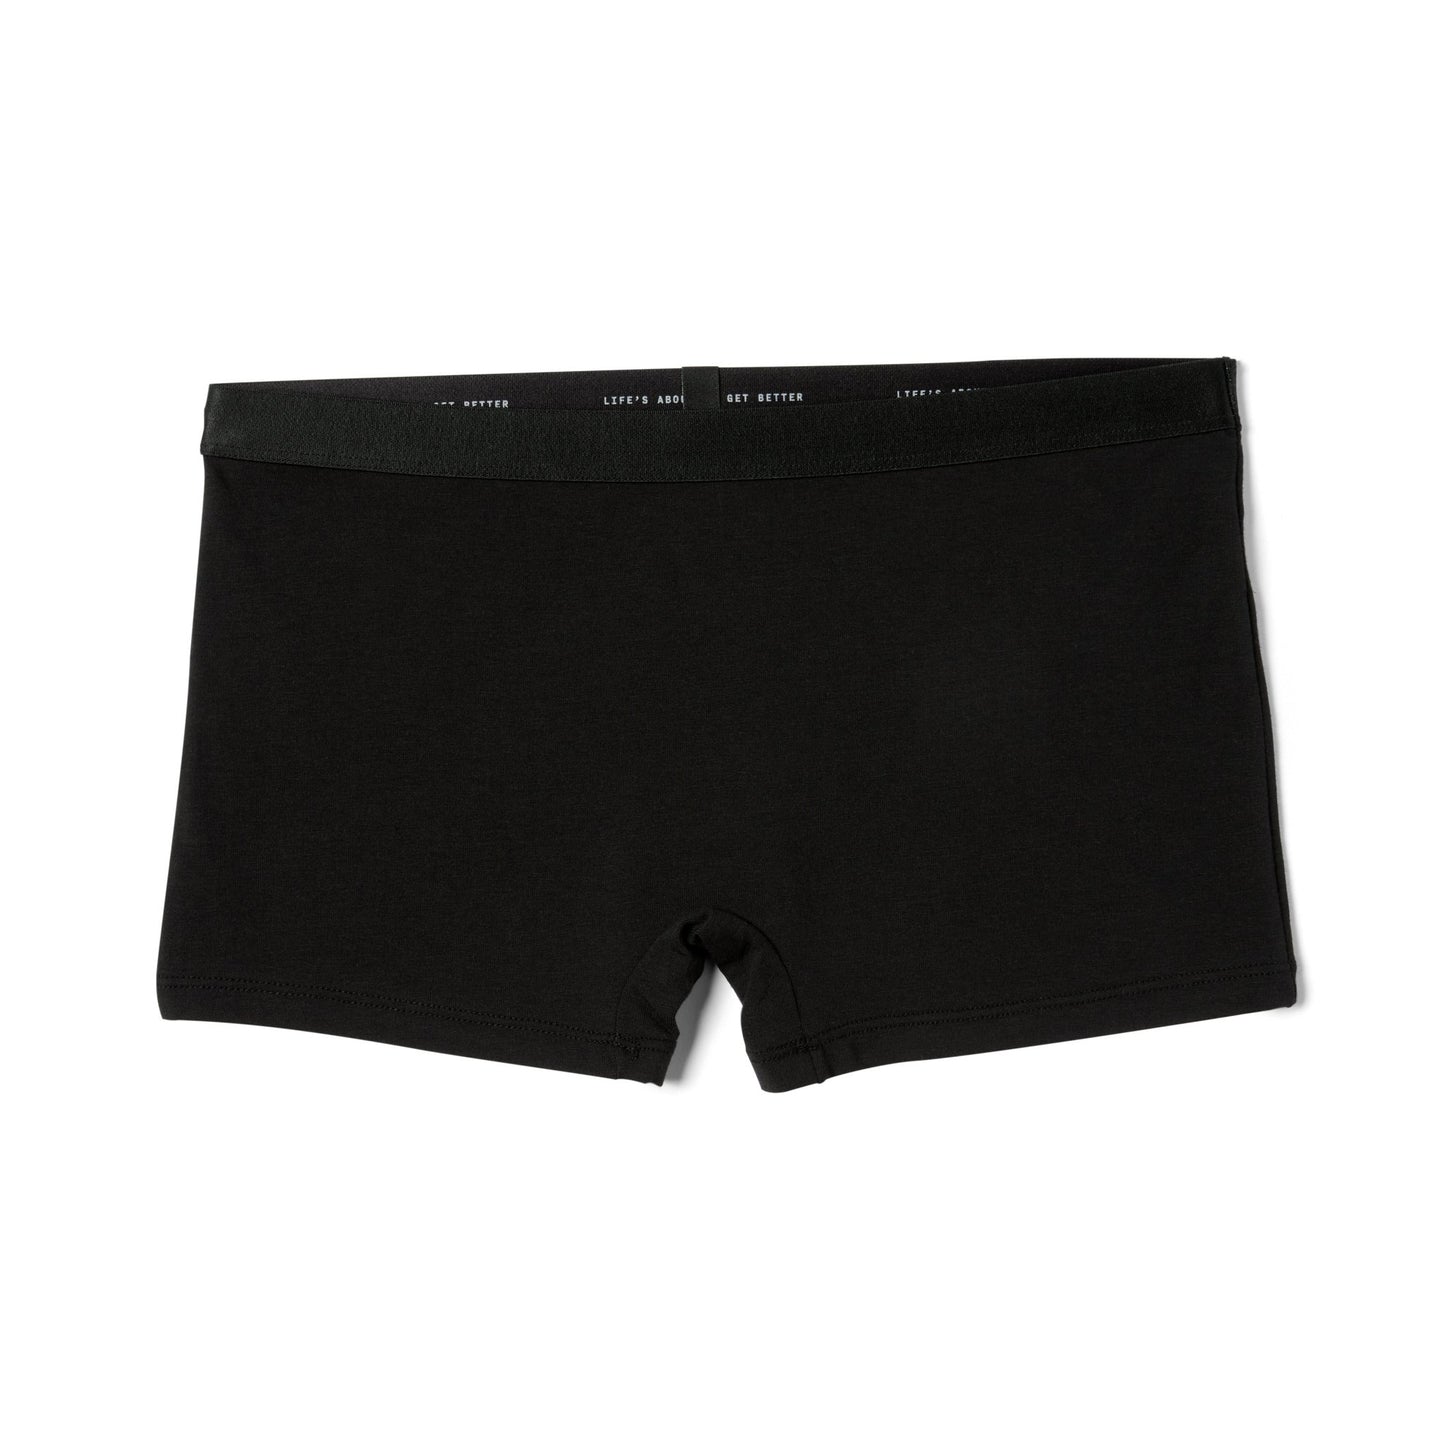 A comfortable Better Cotton Boyshort featuring a waistband by Better Clothing Company.